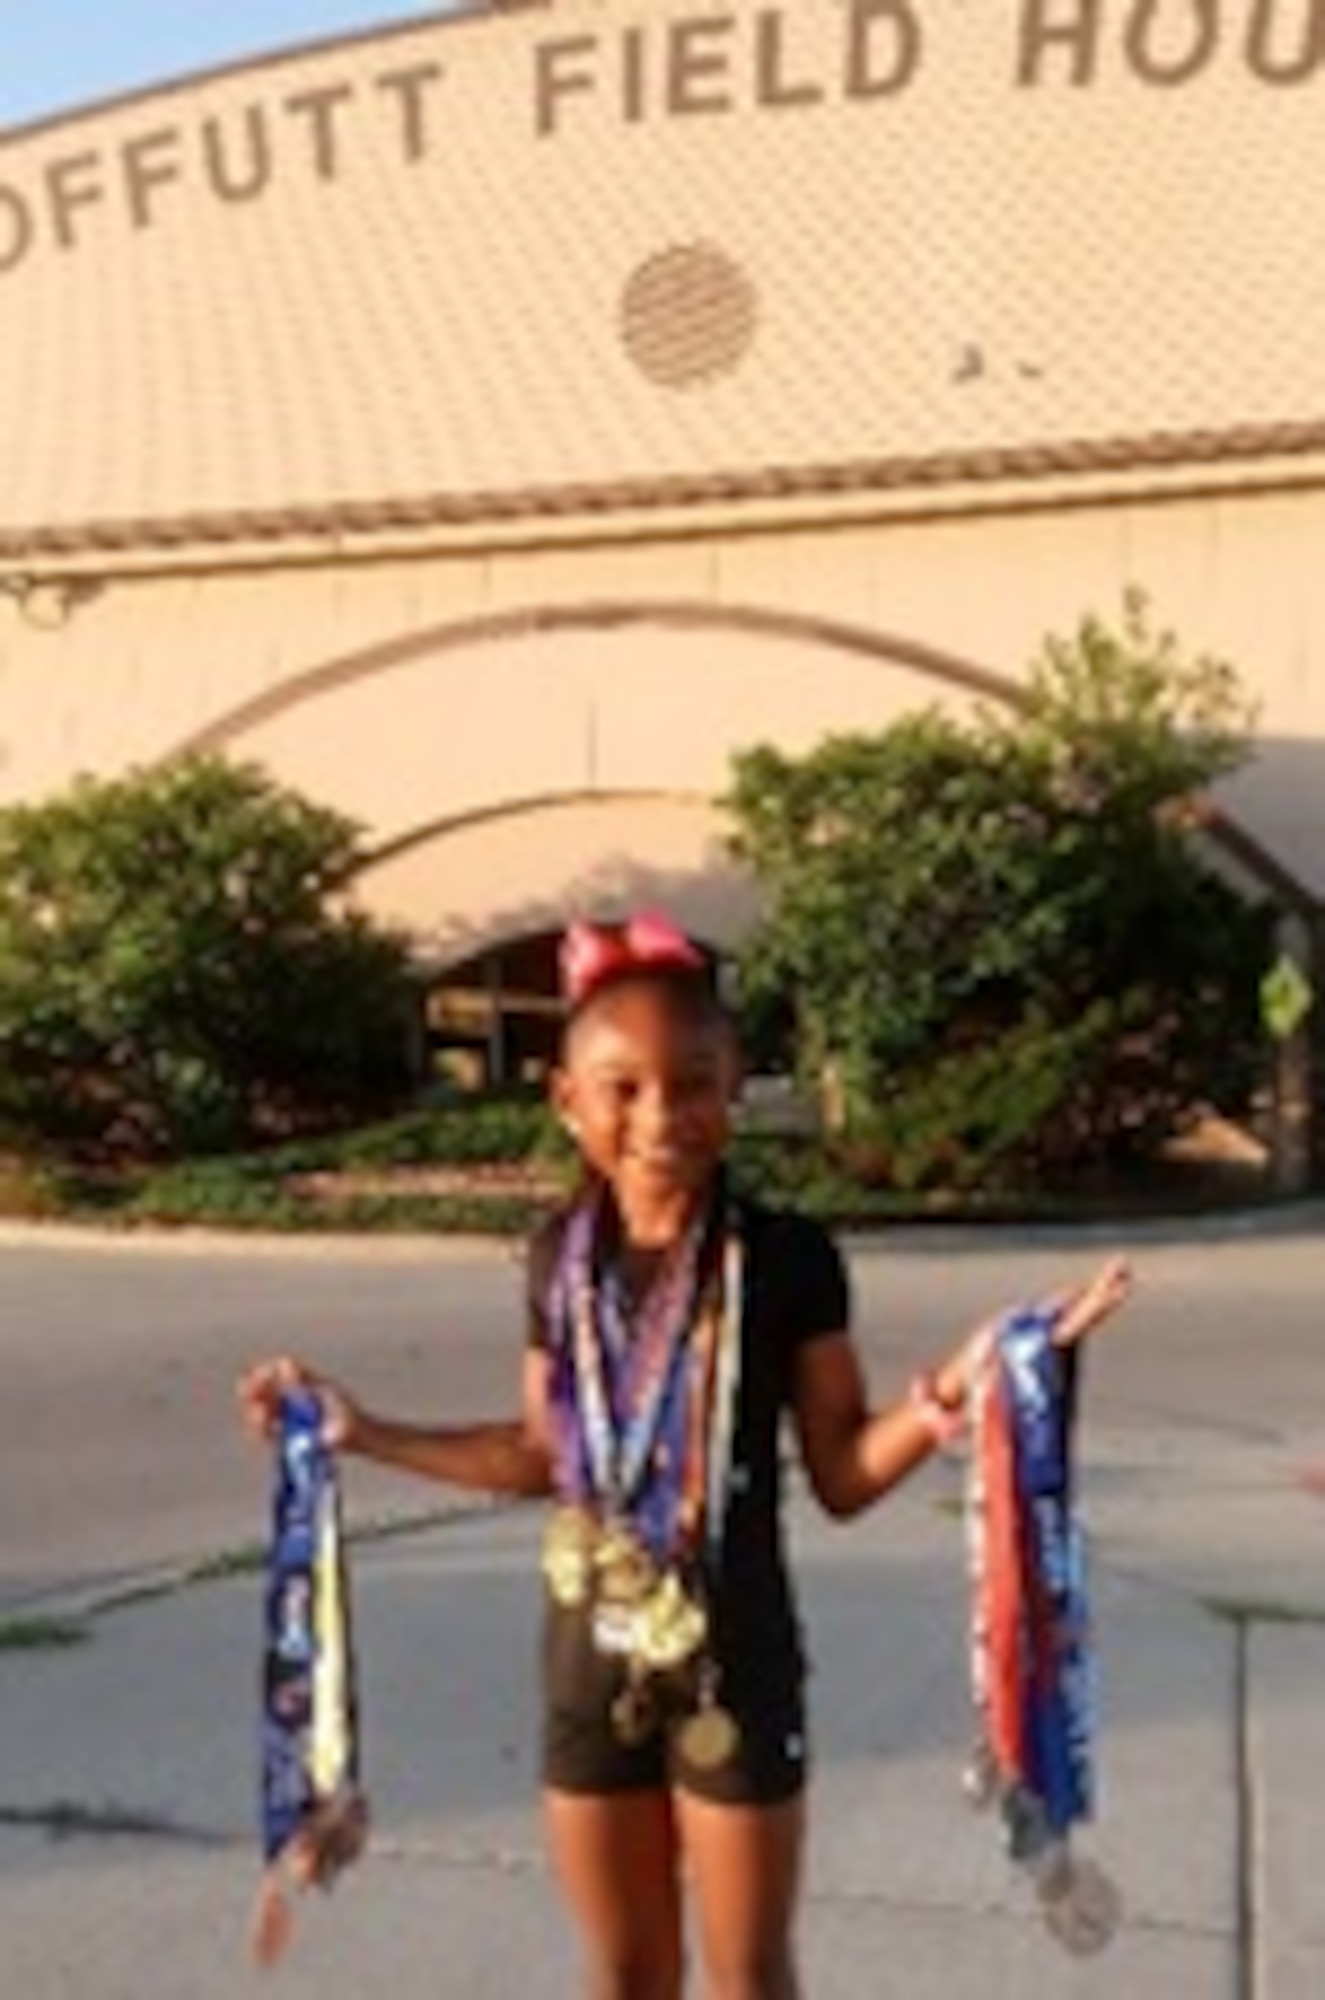 Jaiya Patillo, a Junior Olympian, poses for a photo outside the Offutt Field House on Offutt Air Force Base, Nebraska, 2018. After spending a considerable amount of time training at Offutt, Jaiya chose to represent the Air Force on her track apparel for Amateur Athletic Union track meets. (Courtesy Photo)